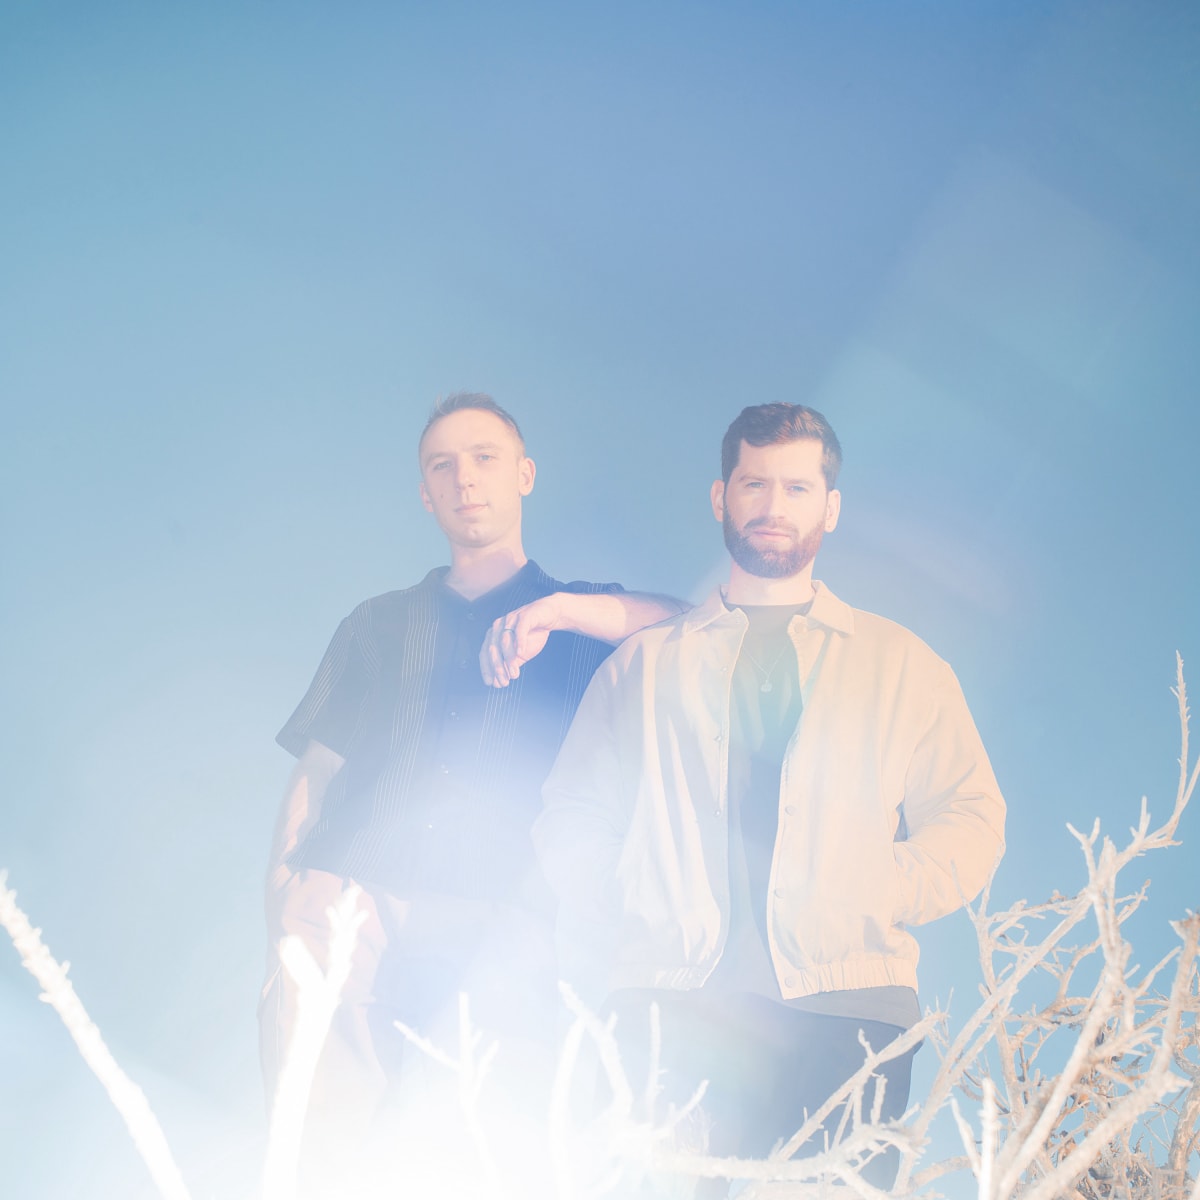 ODESZA Drop Haunting Single From Upcoming Fourth Album: Listen to